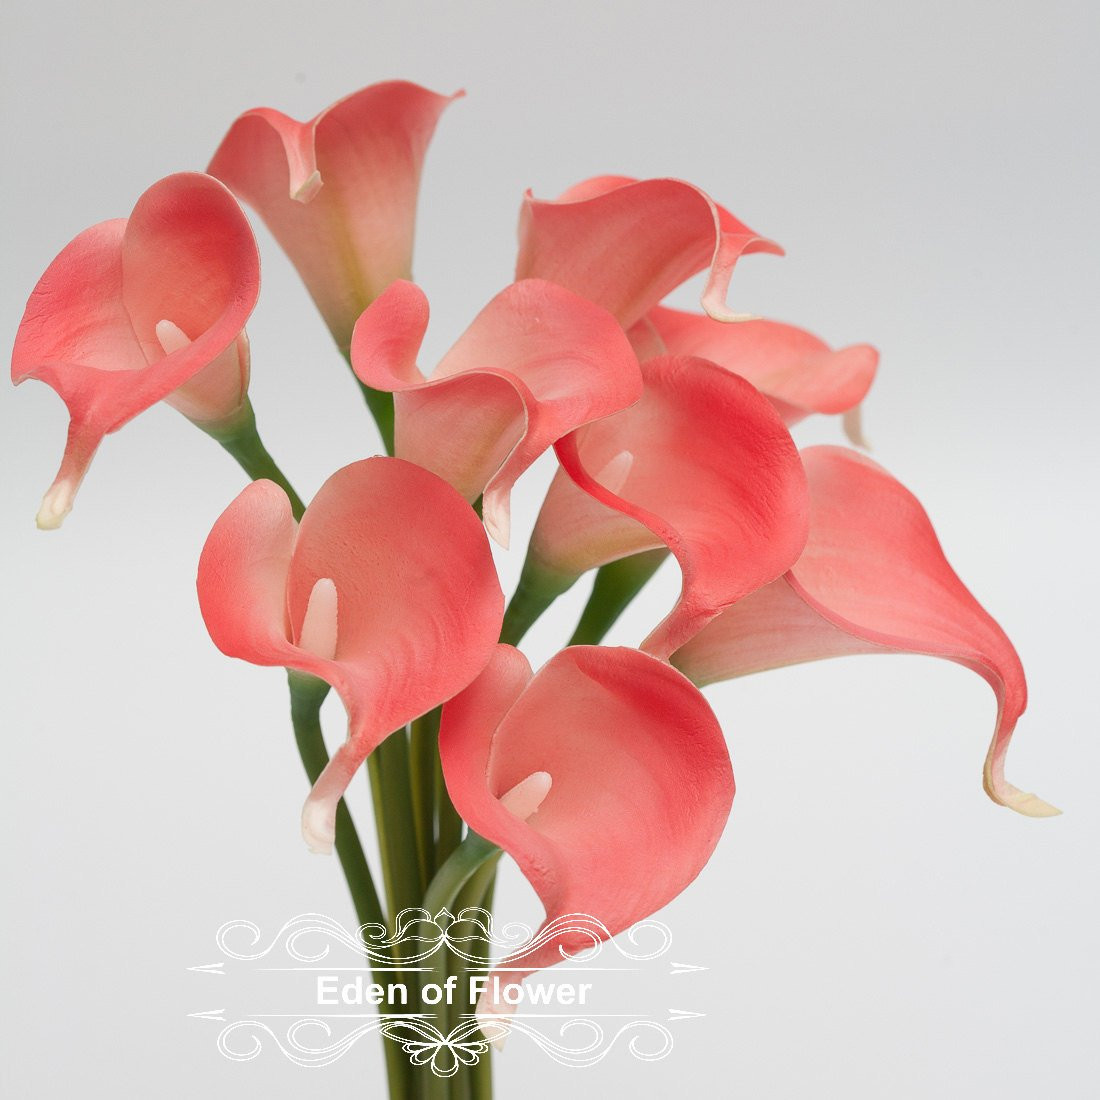 cowboy boot vase wedding decorations of real touch coral calla lily for bridal bouquets wedding etsy with regard to dzoom